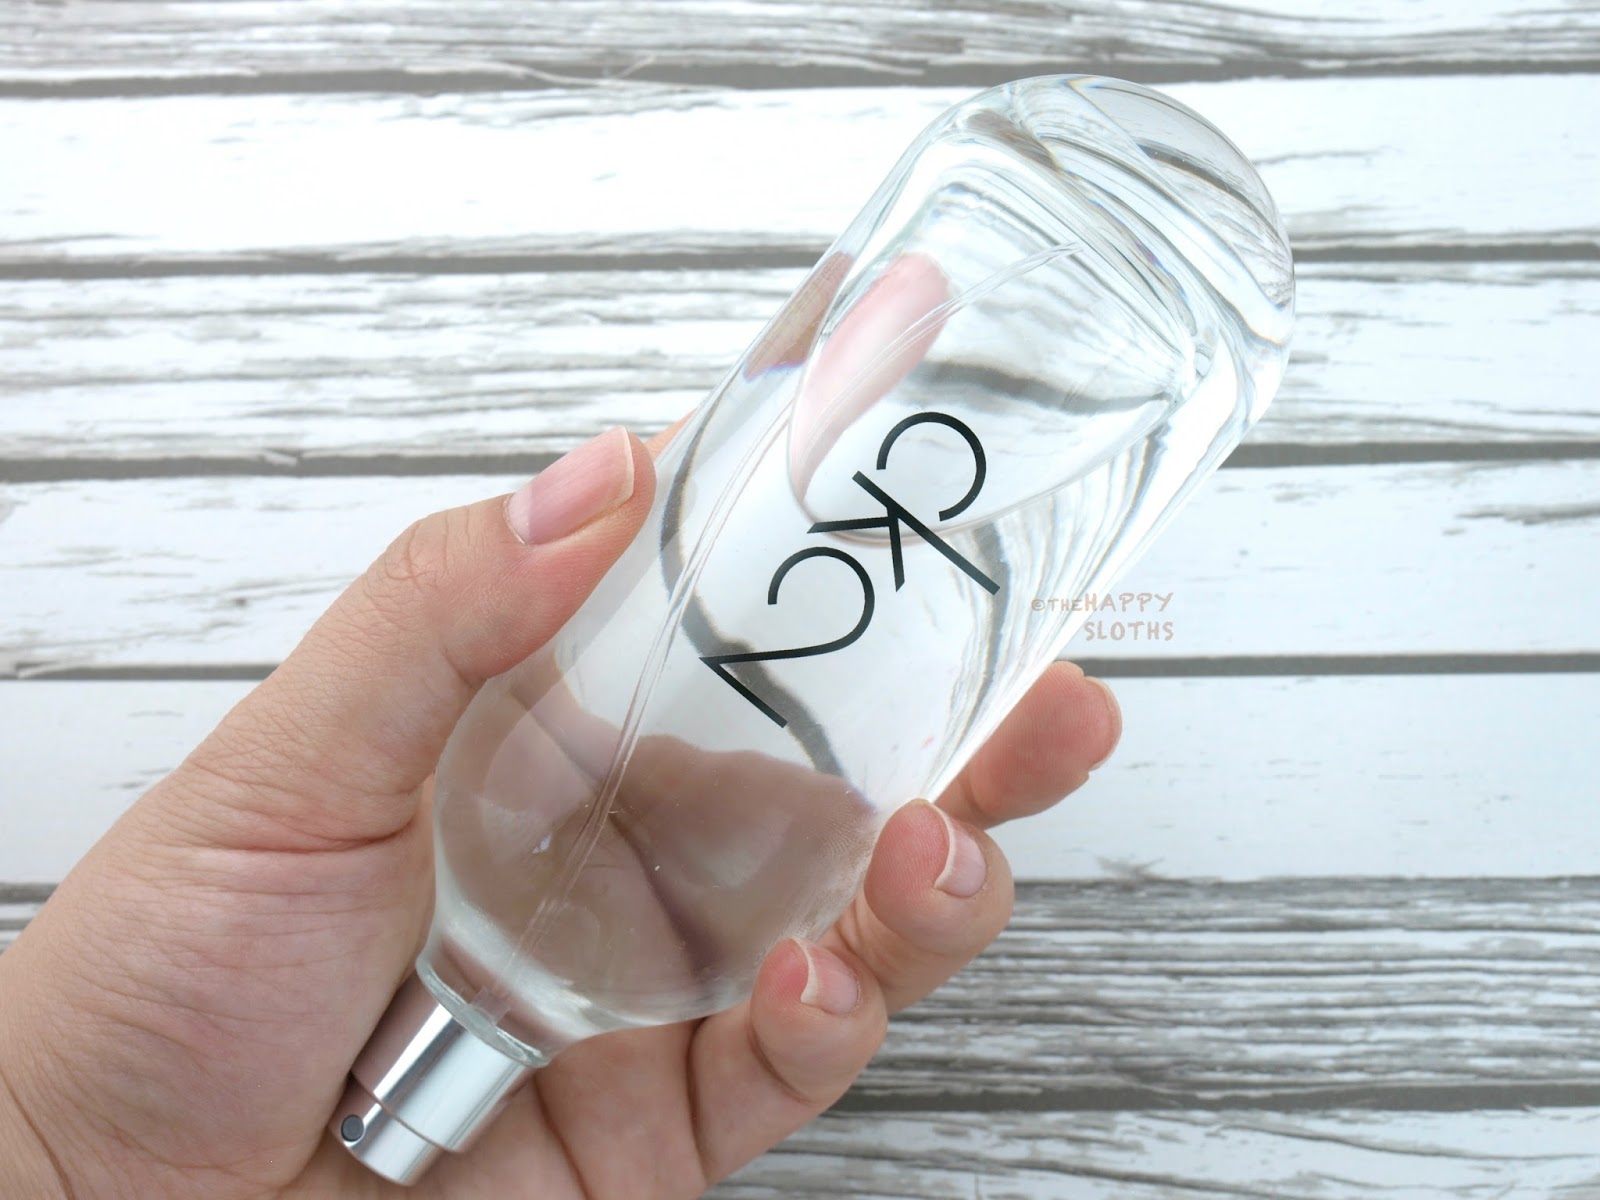 Calvin Klein Eau de Toilette: Review | The Sloths: Beauty, and Skincare Blog Reviews and Swatches